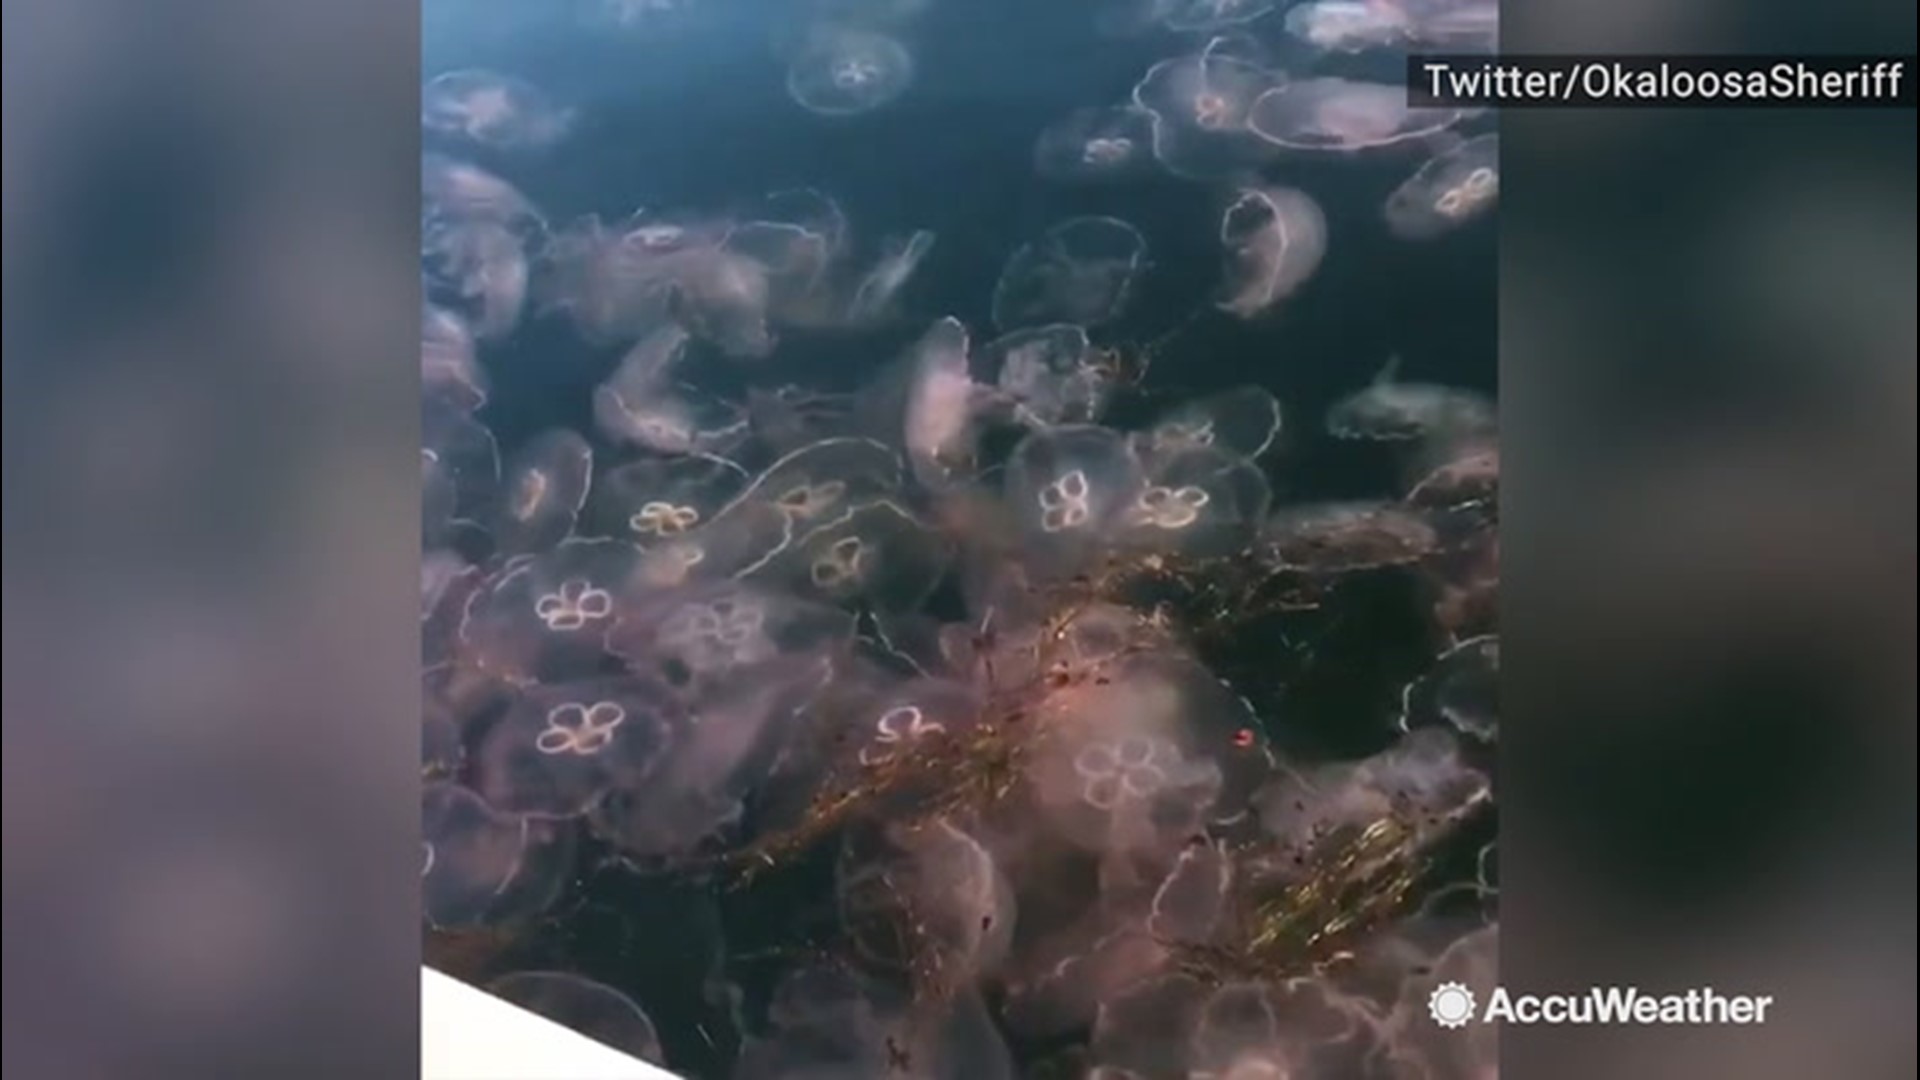 It's not a very good day to go for a swim in Choctawhatchee Bay, Florida, on Sept. 18, with jellyfish as far as the eye can see.